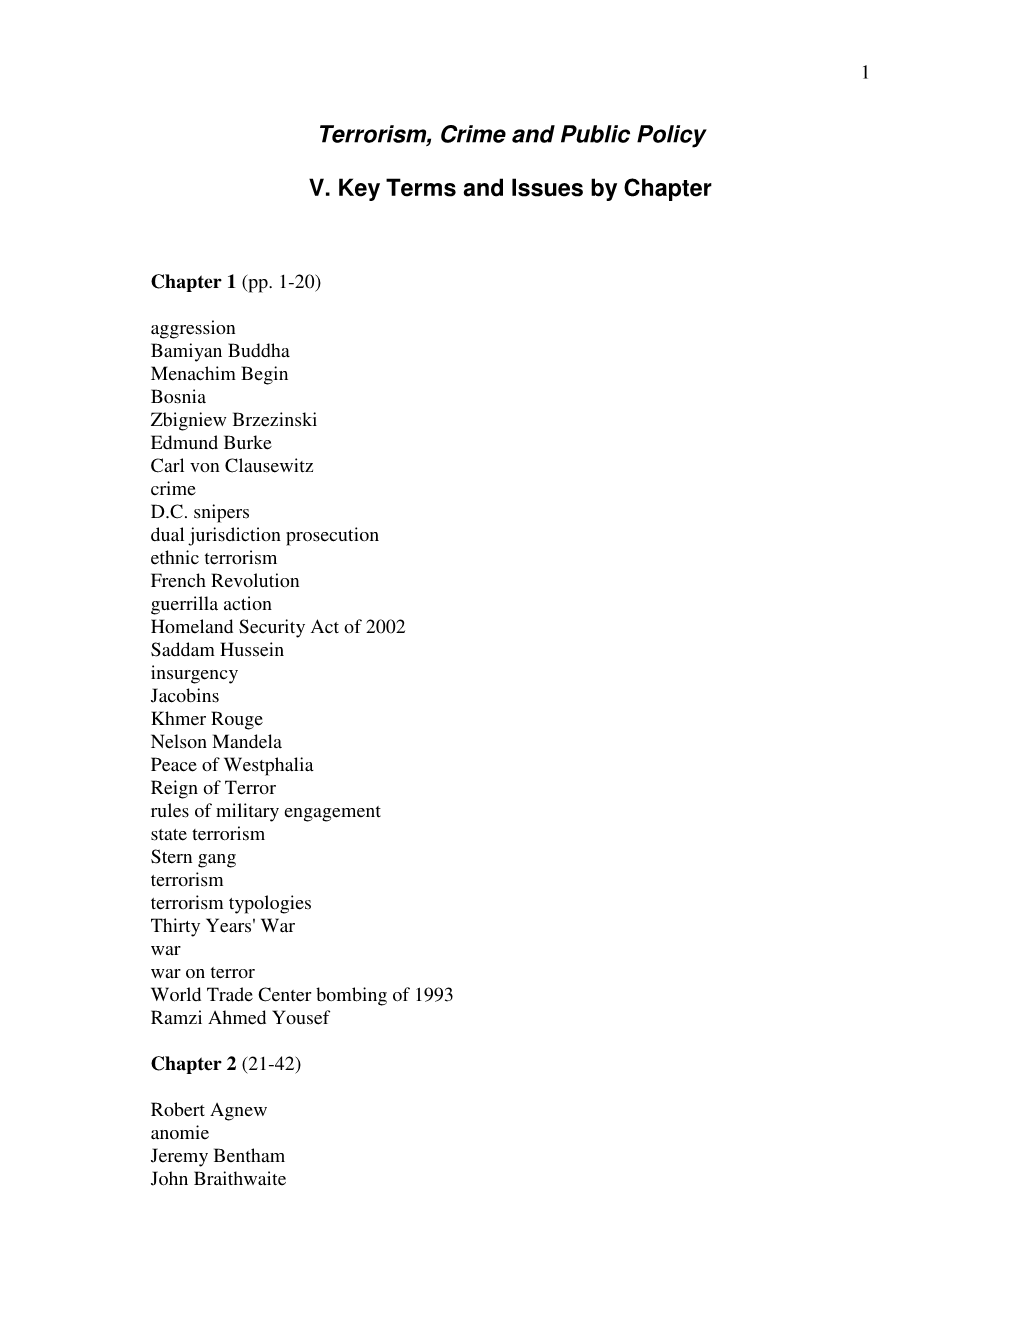 Terrorism, Crime and Public Policy V. Key Terms and Issues by Chapter